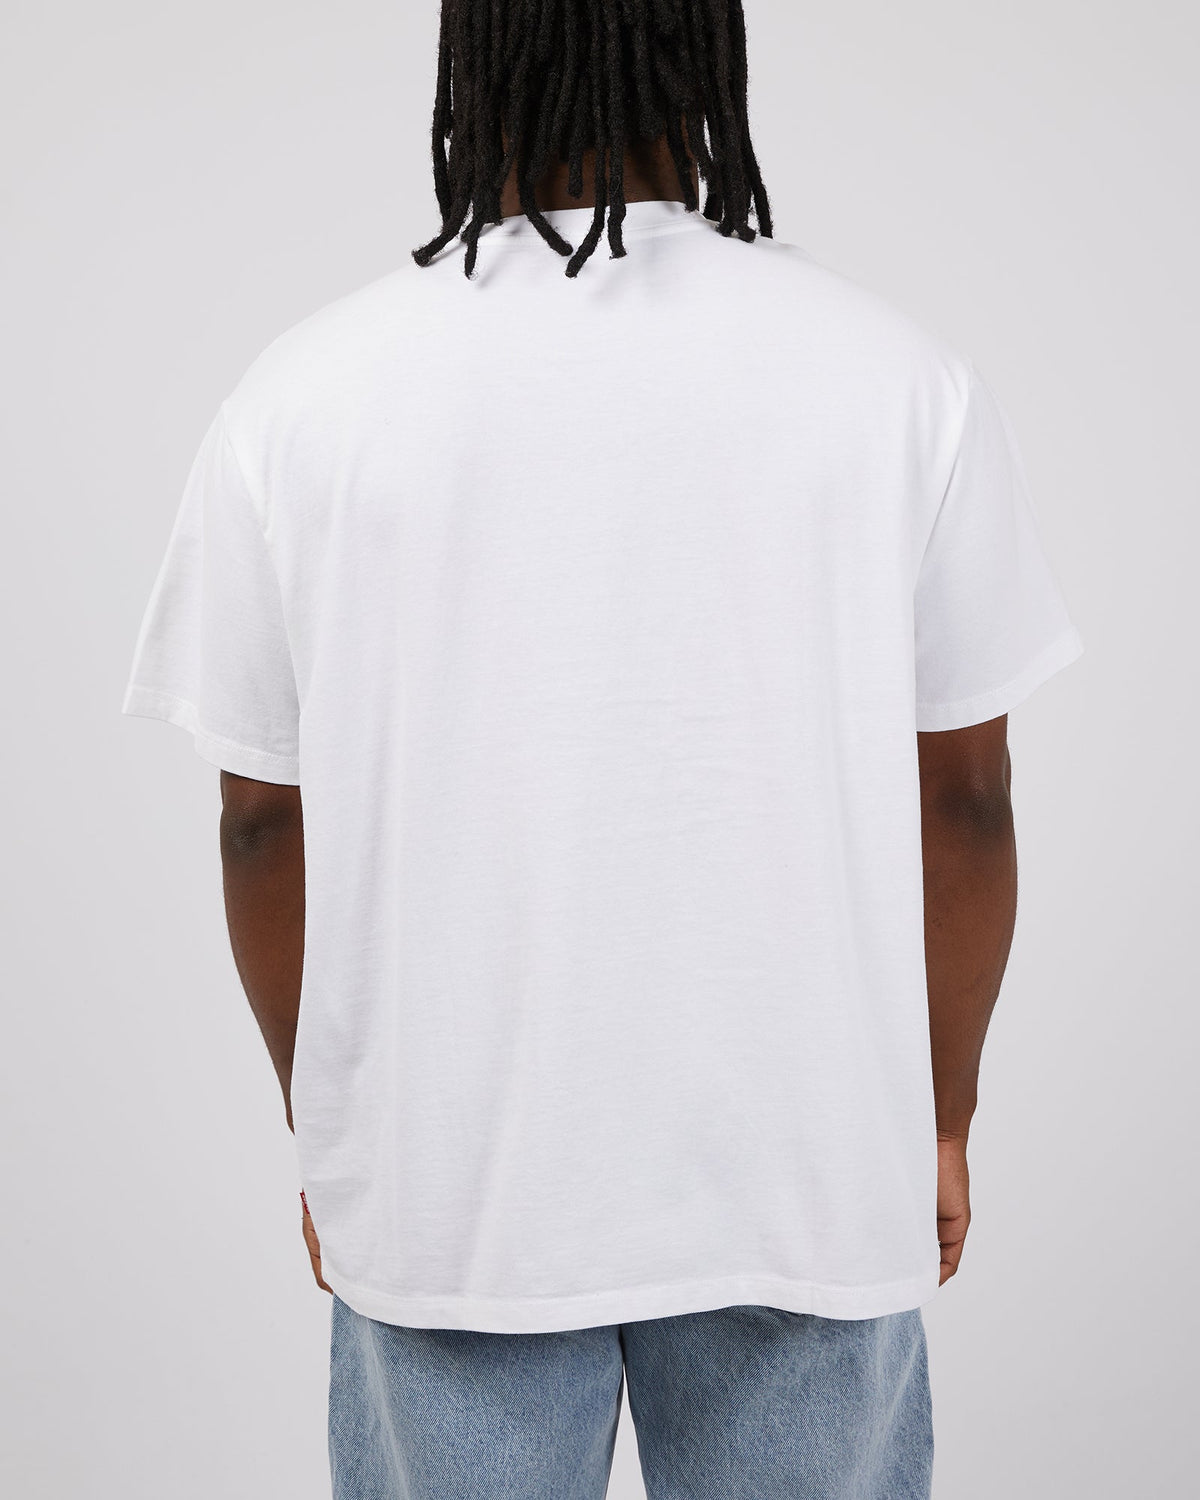 Levis-Vintage Fit Graphic Tee White-Edge Clothing